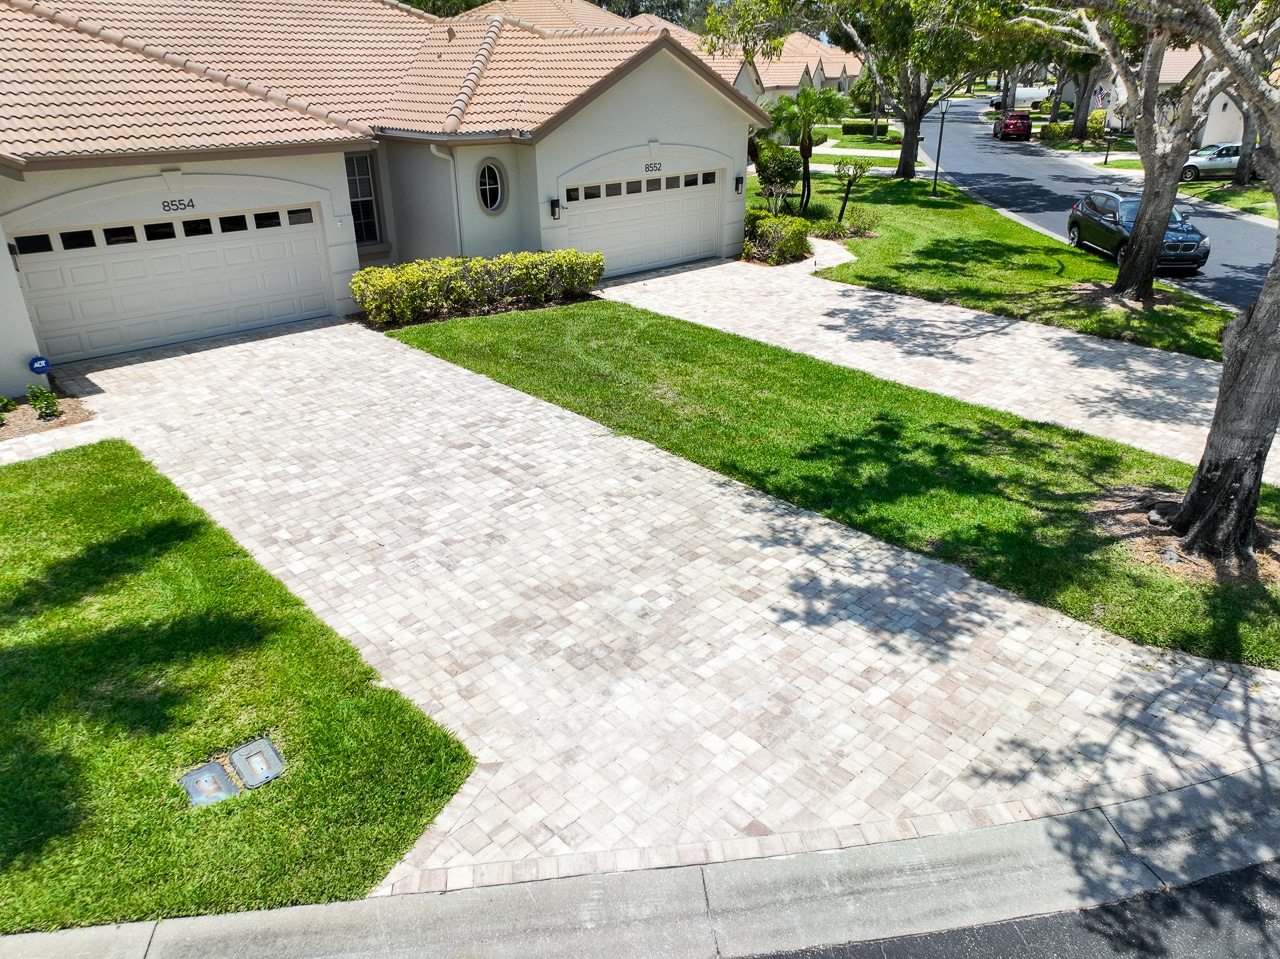 Residential Driveway Paver